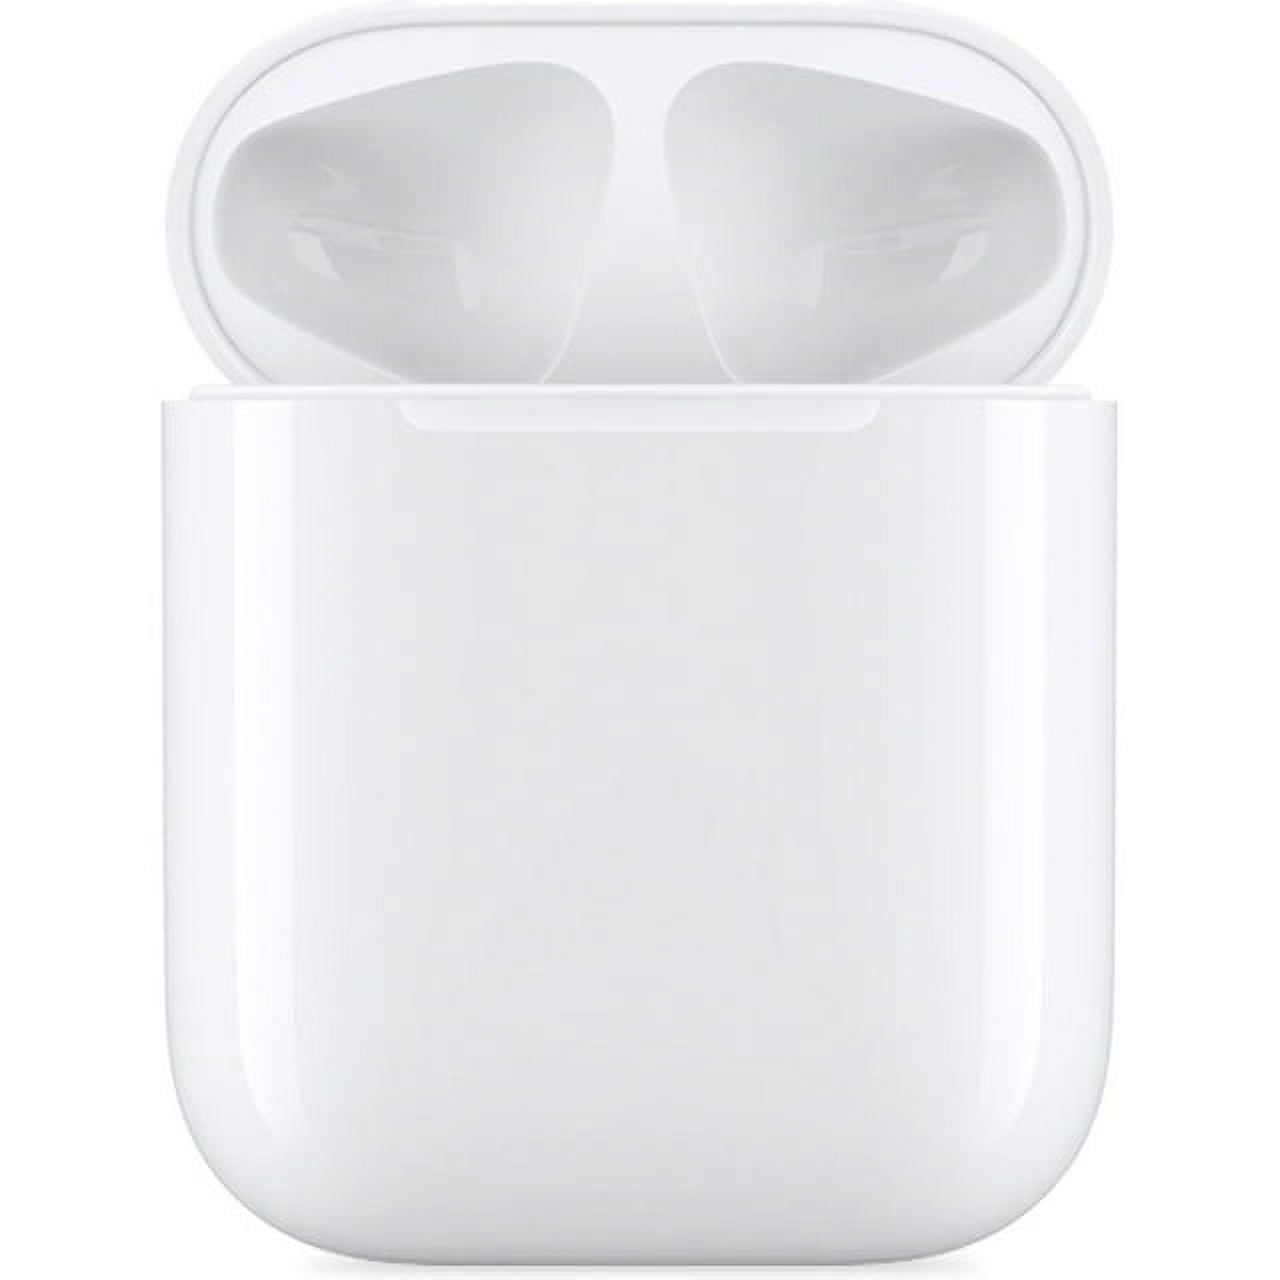 Used Apple AirPods Generation 2 with Charging Case MV7N2AM/A (Grade C Used)